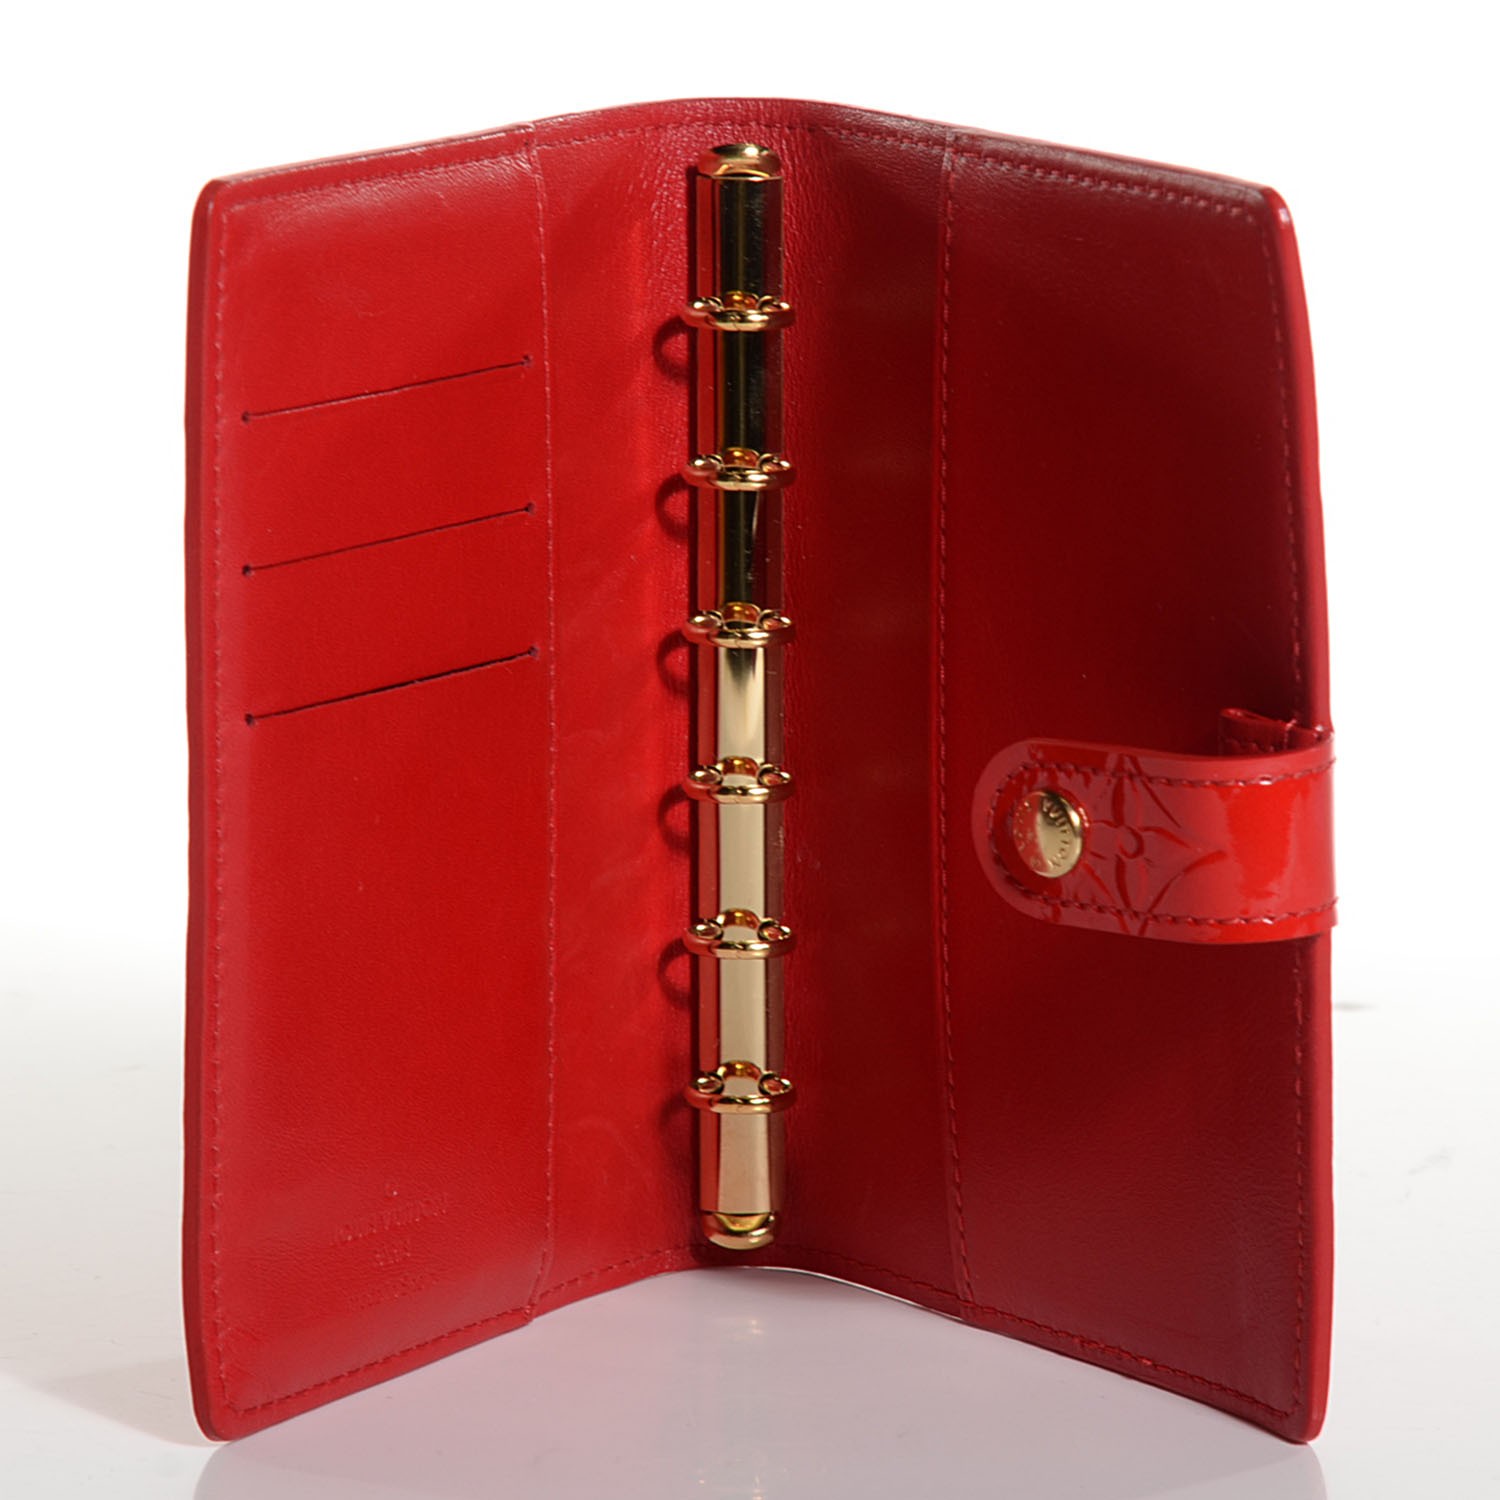 LOUIS VUITTON Vernis Small Ring Agenda Cover Red 104398